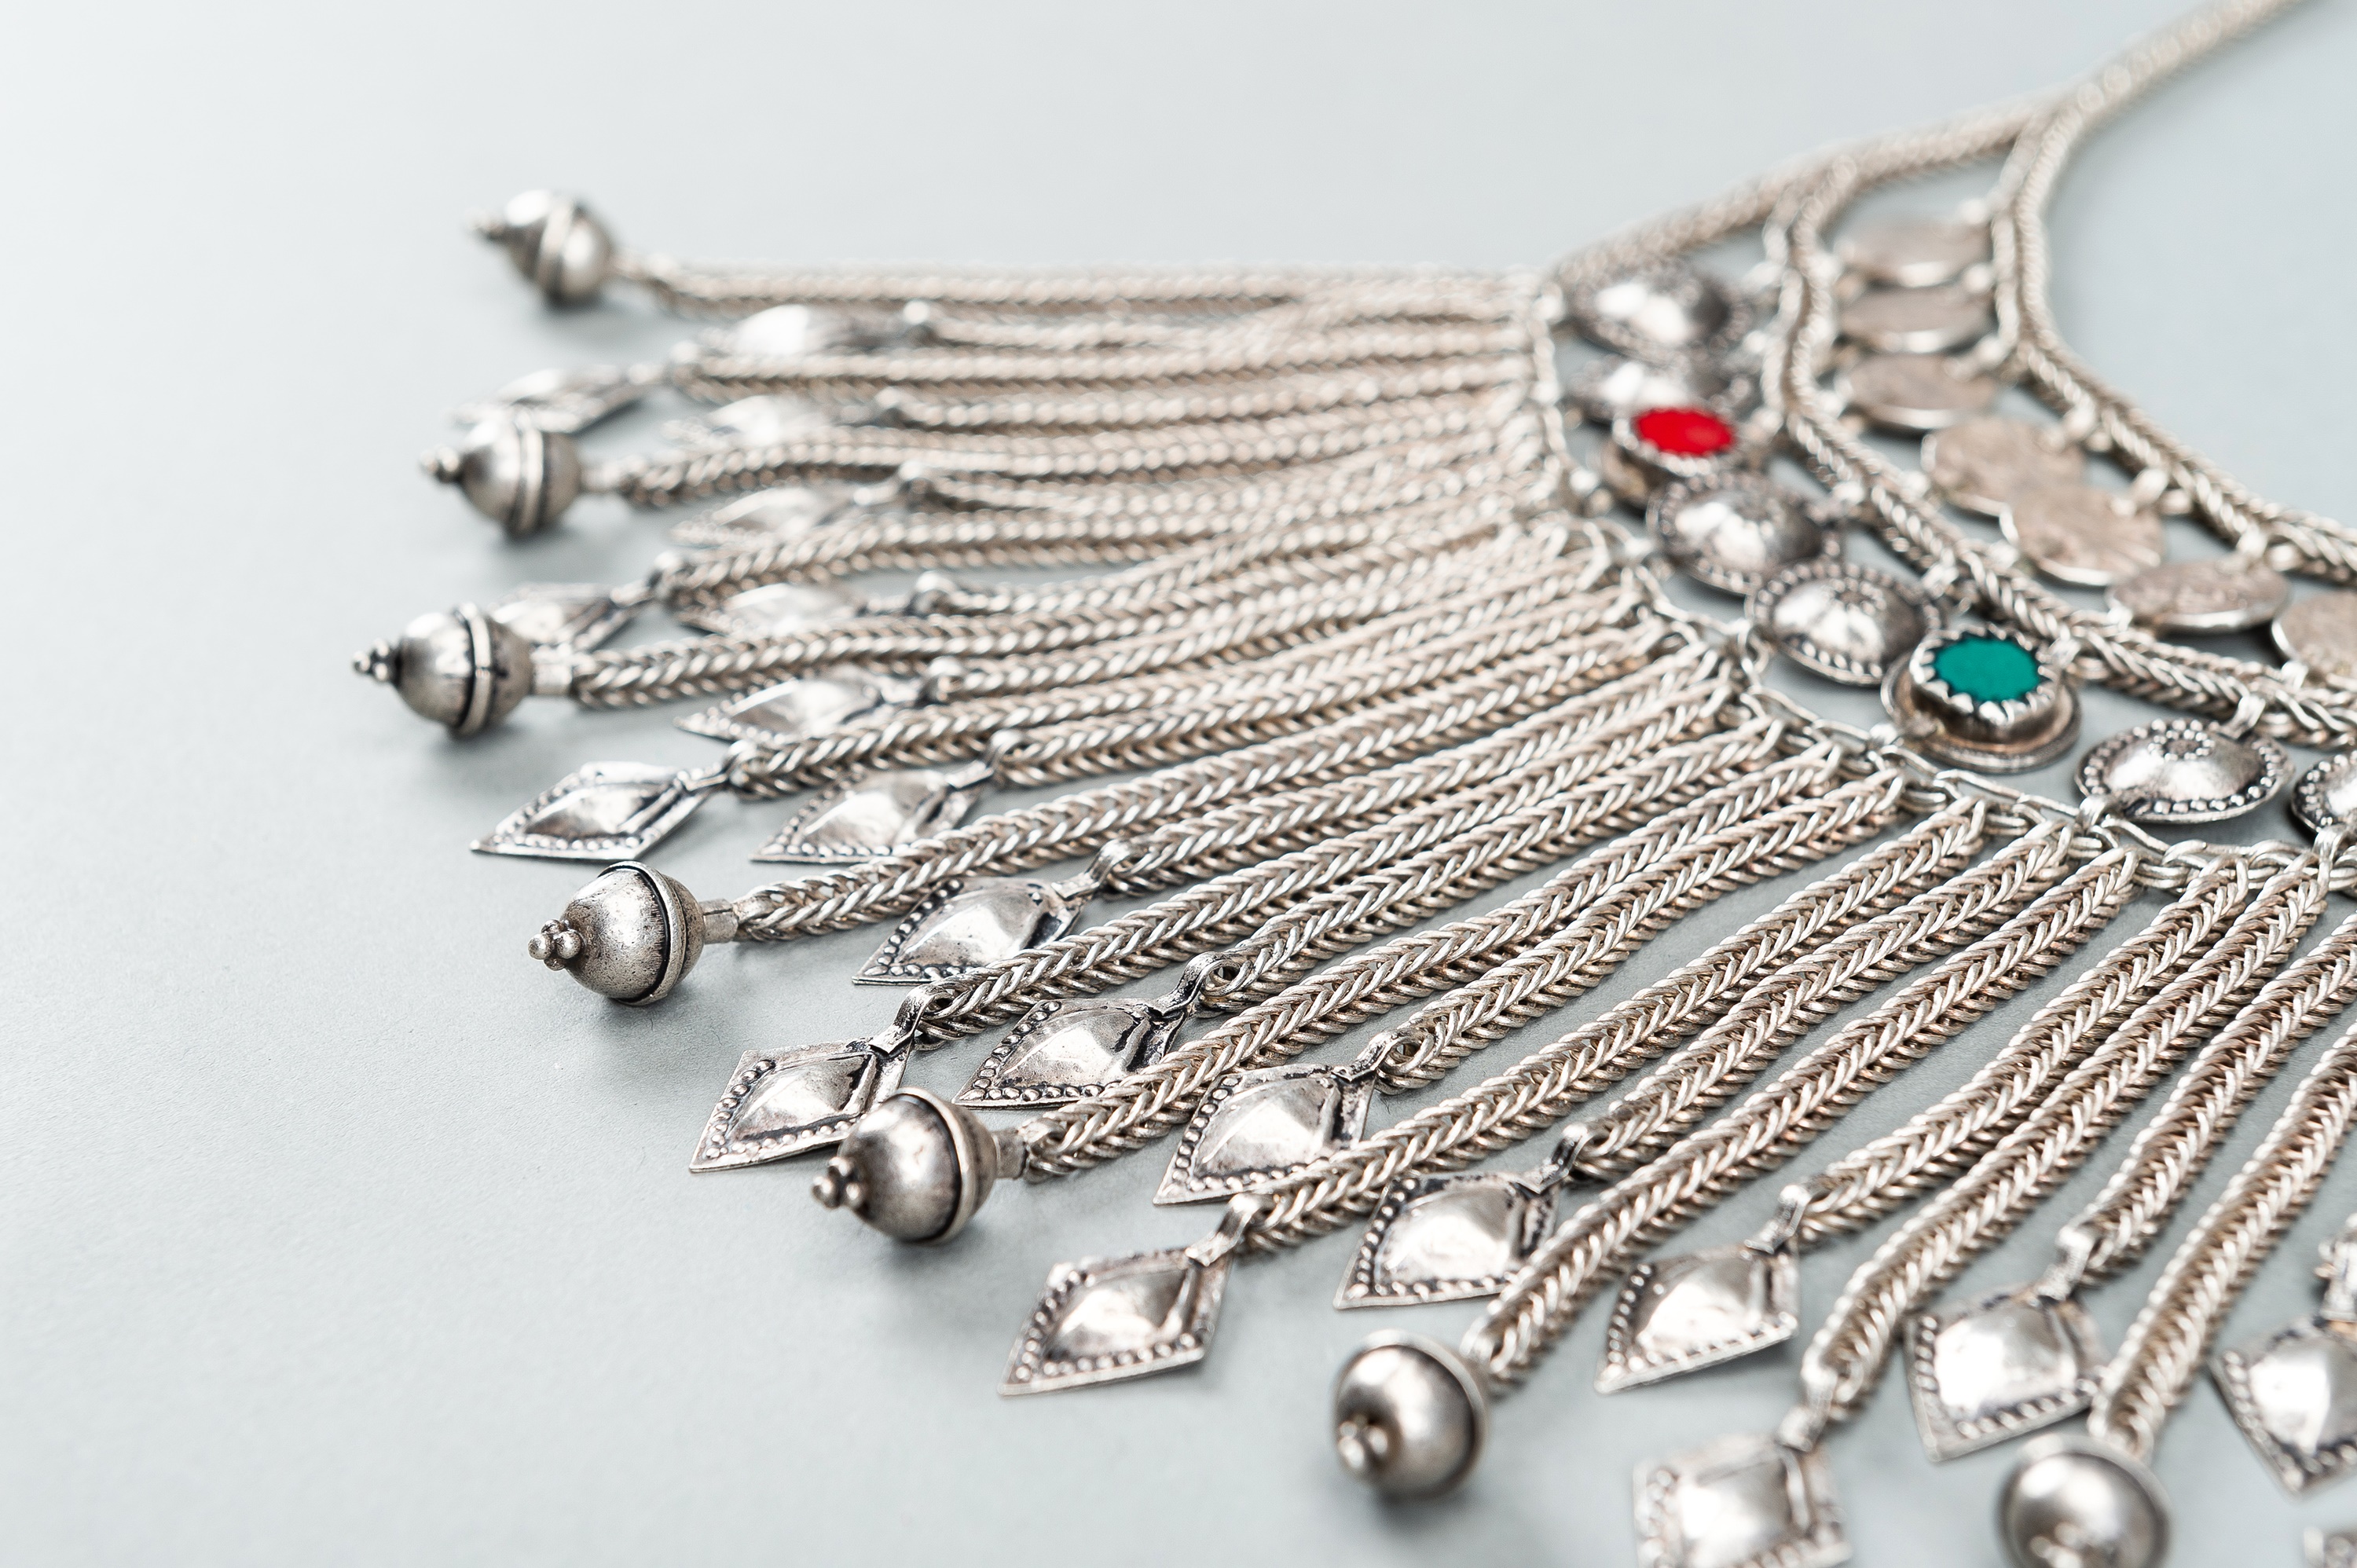 A TRIBAL AFGHAN MULTI-STRAND SILVER NECKLACE WITH GLASS INSETS, c. 1950s - Image 8 of 13